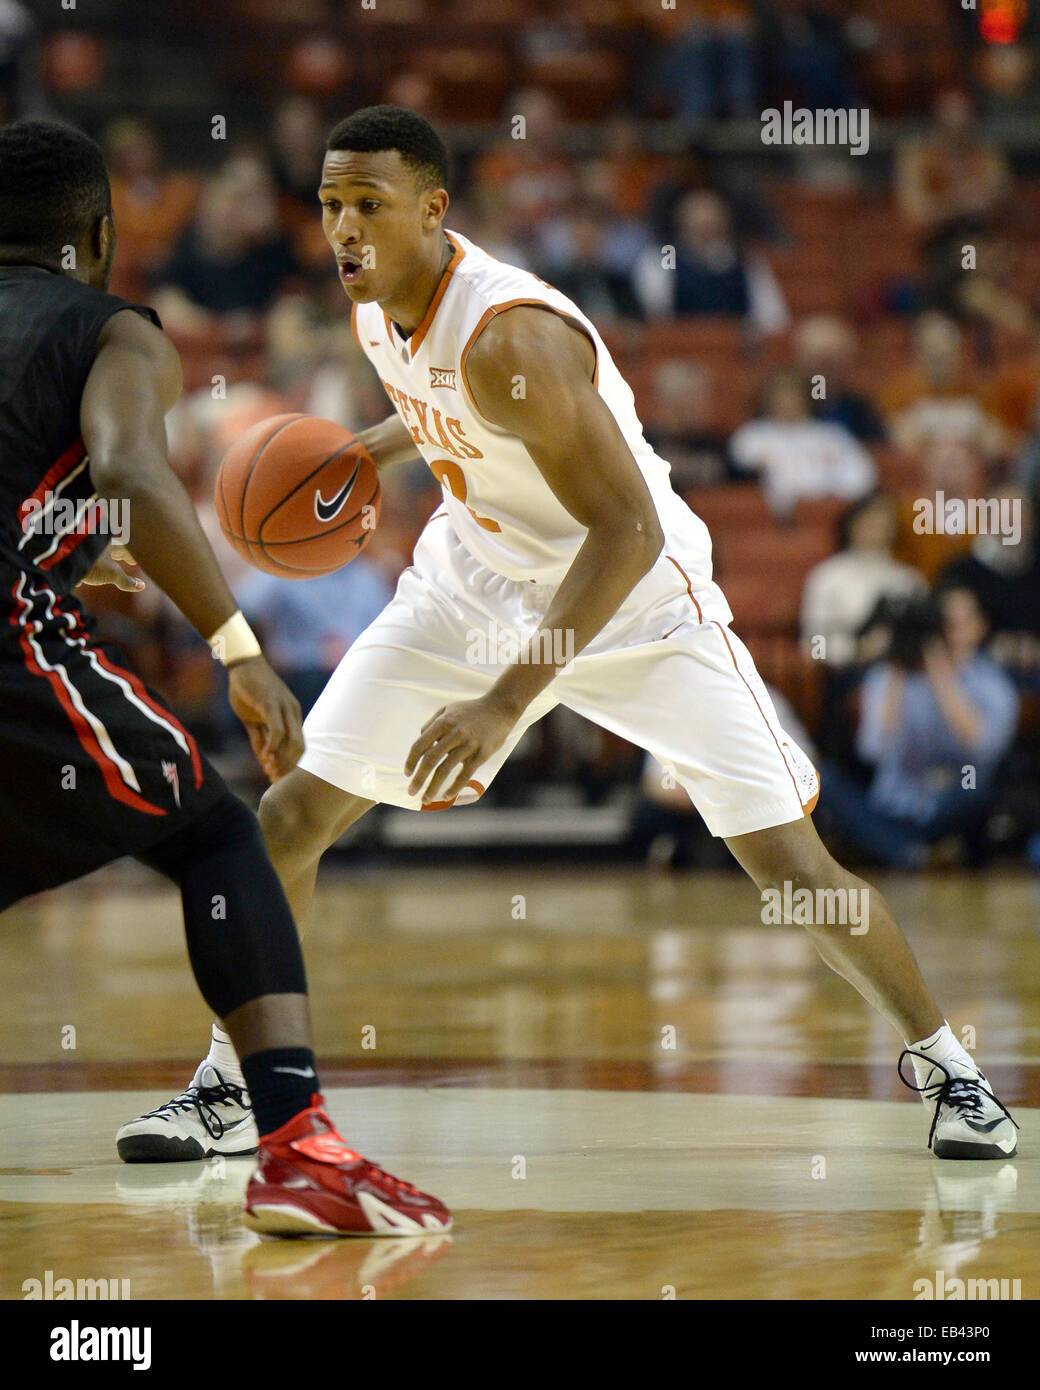 Austin, Texas. 25th Nov, 2014. Demarcus Holland #2 of the Texas Longhorns in action vs the Saint Francis Red Flash at the Frank Erwin Center in Austin Texas. Texas leads Saint Francis 36-23 at the half. Credit:  csm/Alamy Live News Stock Photo